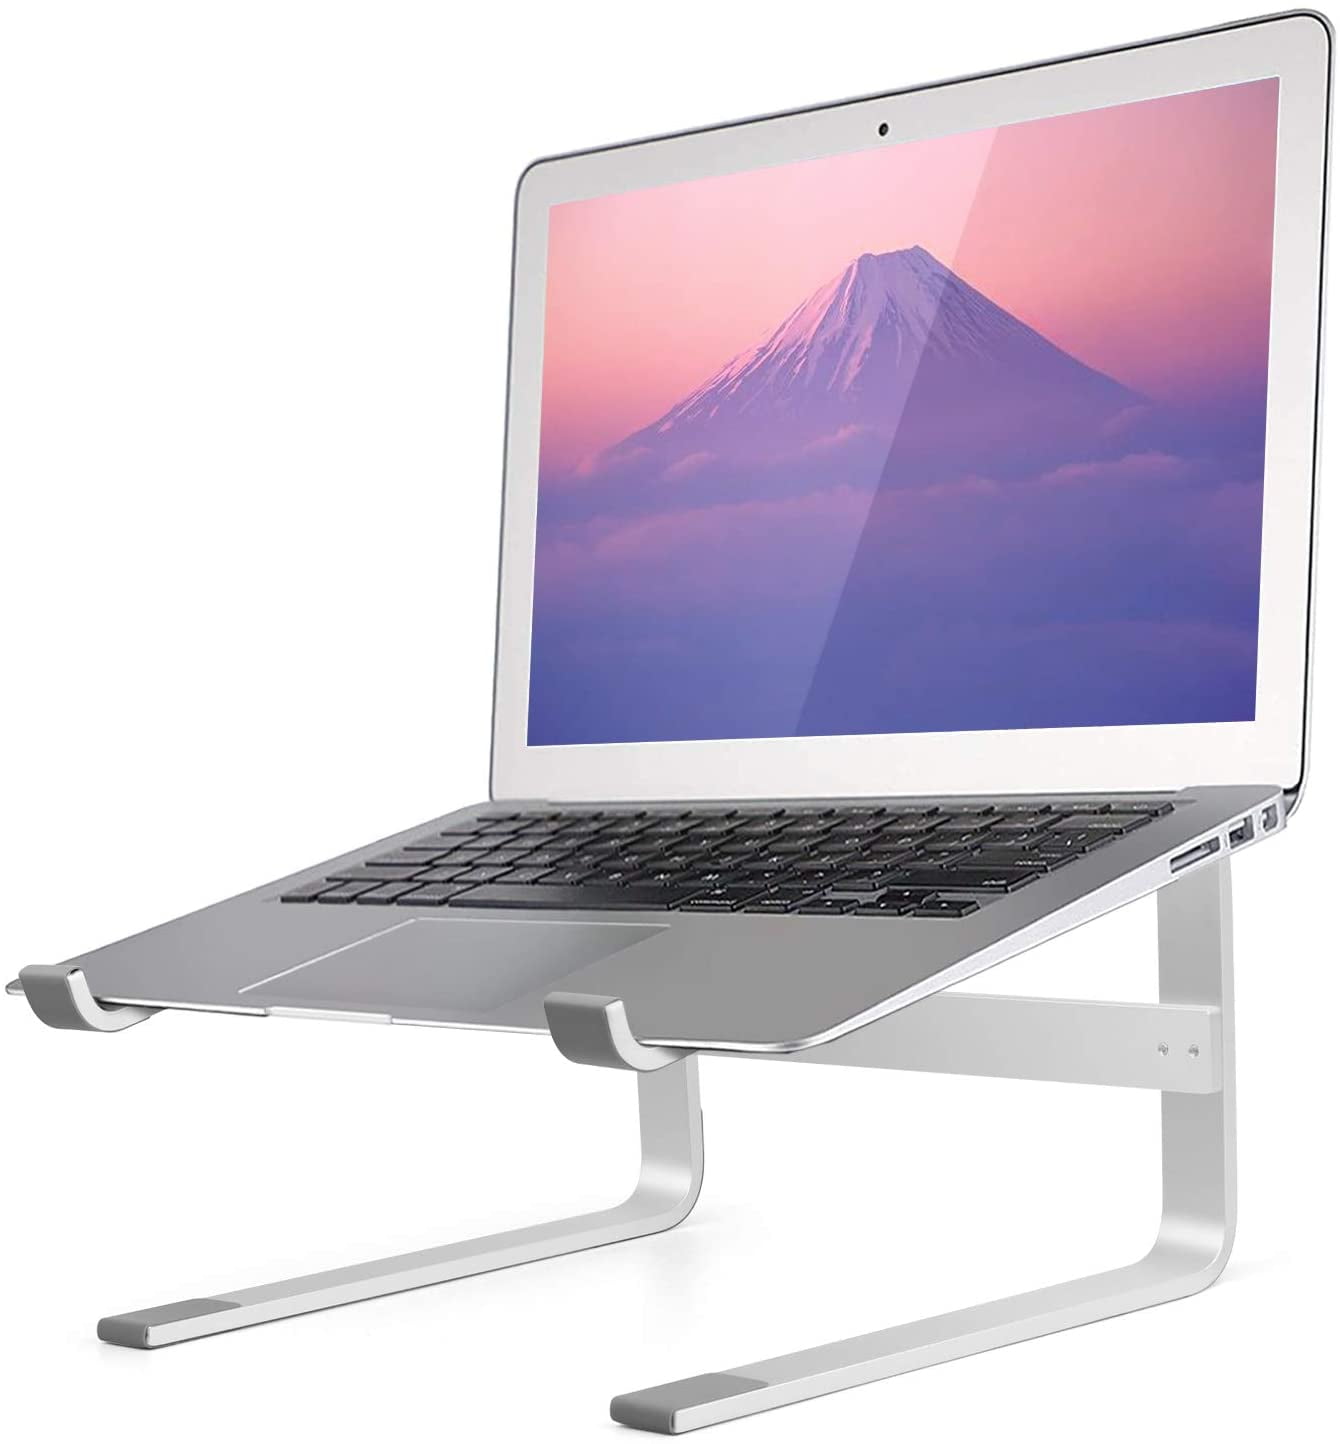 Ventilated Aluminum Laptop Support Riser Compatible with Any 11 to 15 inches Notebook or Tablet Universal Table Mount Ergonomic Laptop Stand 